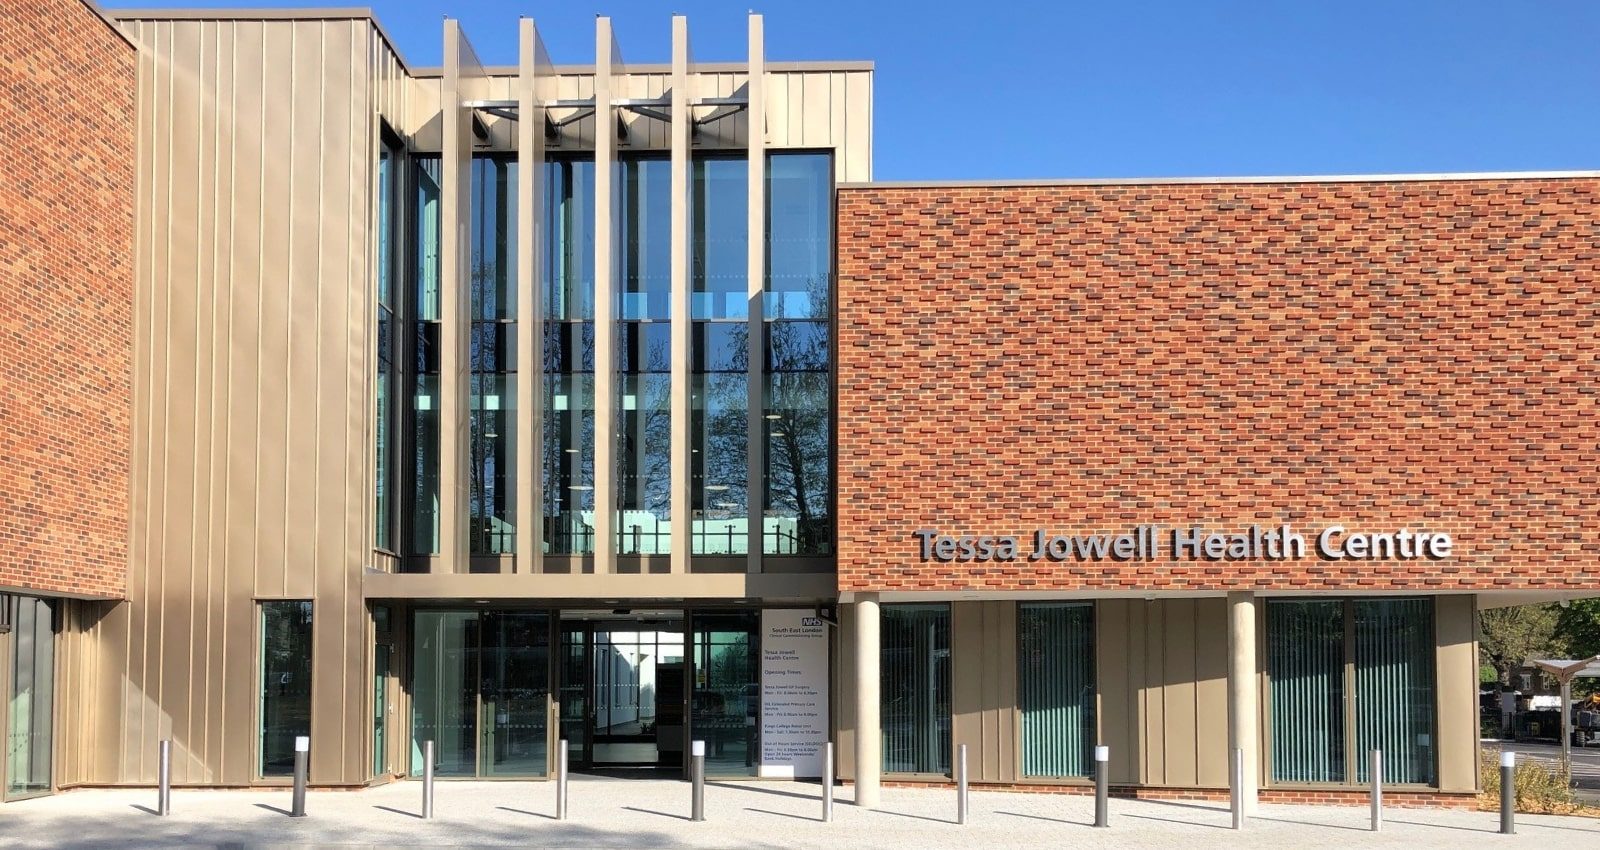 MJ Medical supports completion of Tessa Jowell Health Centre